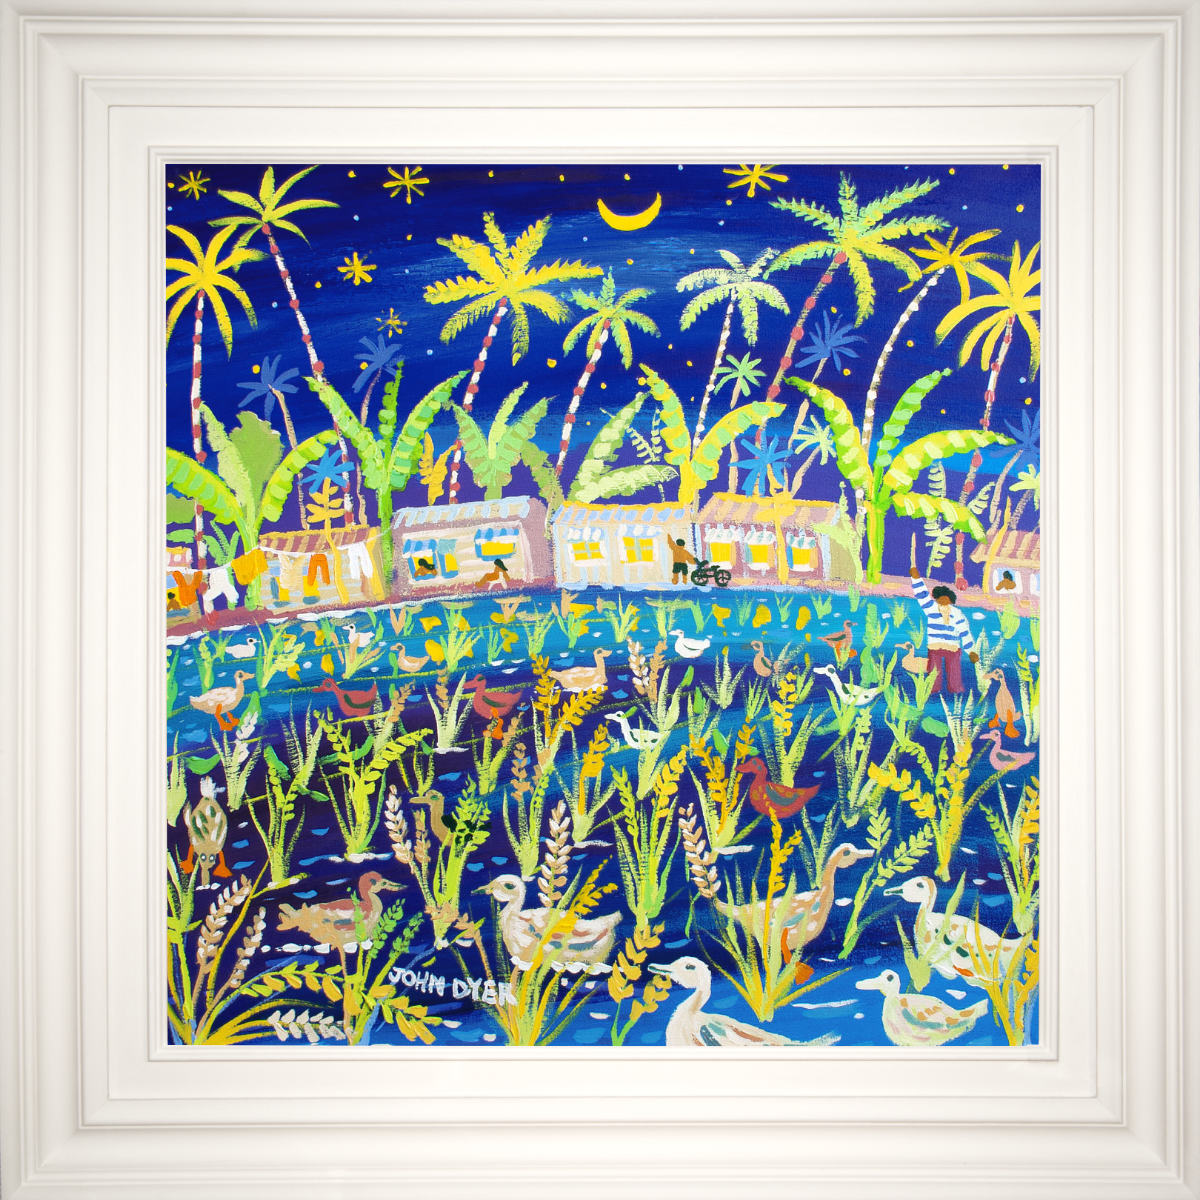 &#39;Paddy Paddling, the Philippines&#39;. 24x24 inches acrylic on canvas. Paintings of Philippines by John Dyer from our Online Art Gallery